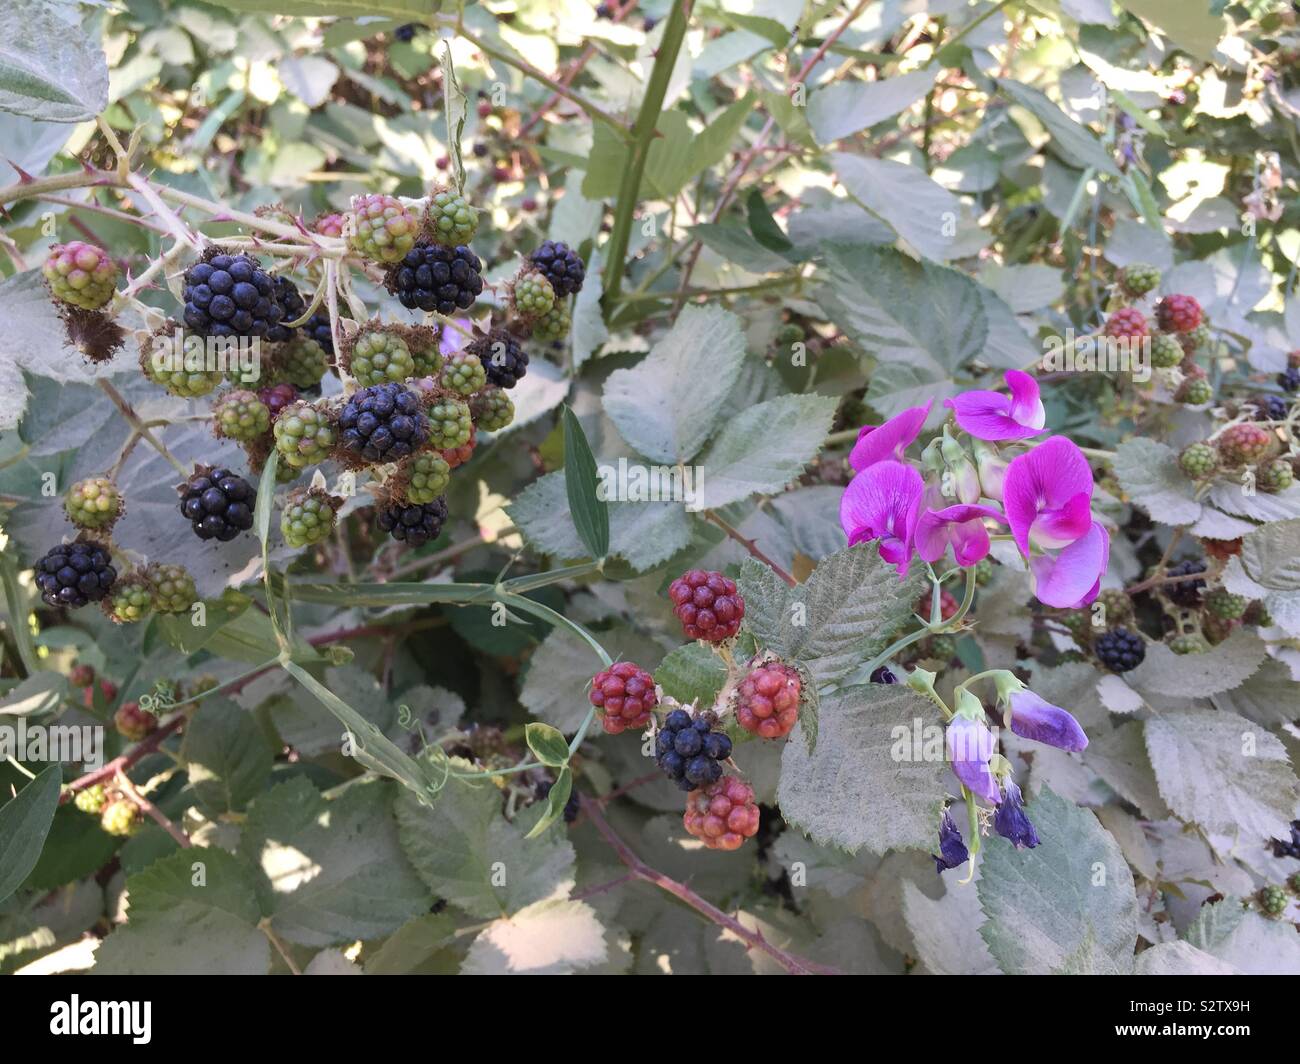 Armenian blackberry and broad leaved sweet pea. Stock Photo